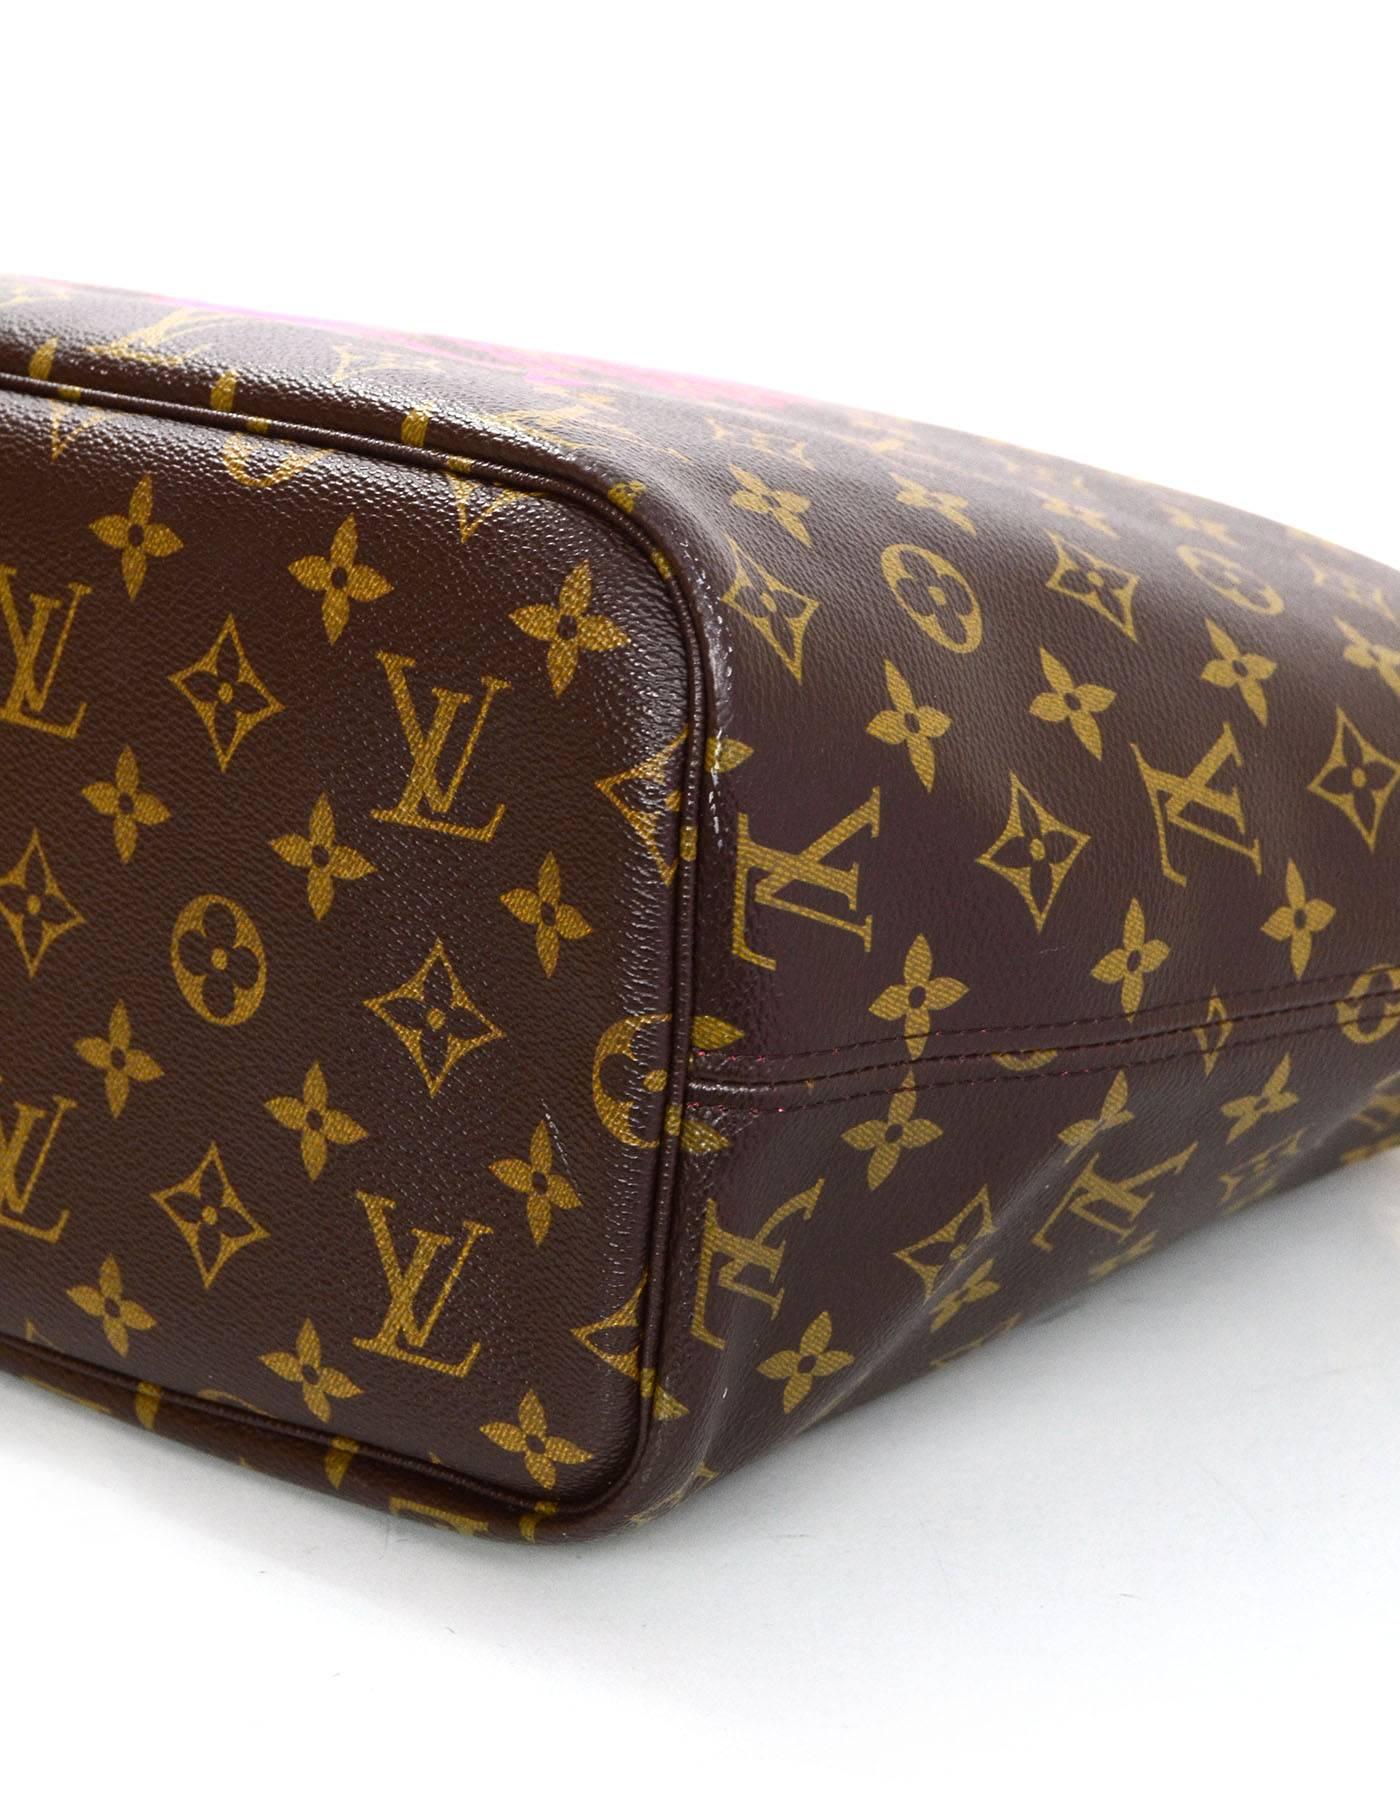 Brown Louis Vuitton Limited Edition 2015 Grenade Monogram V Neverfull MM Tote Bag 